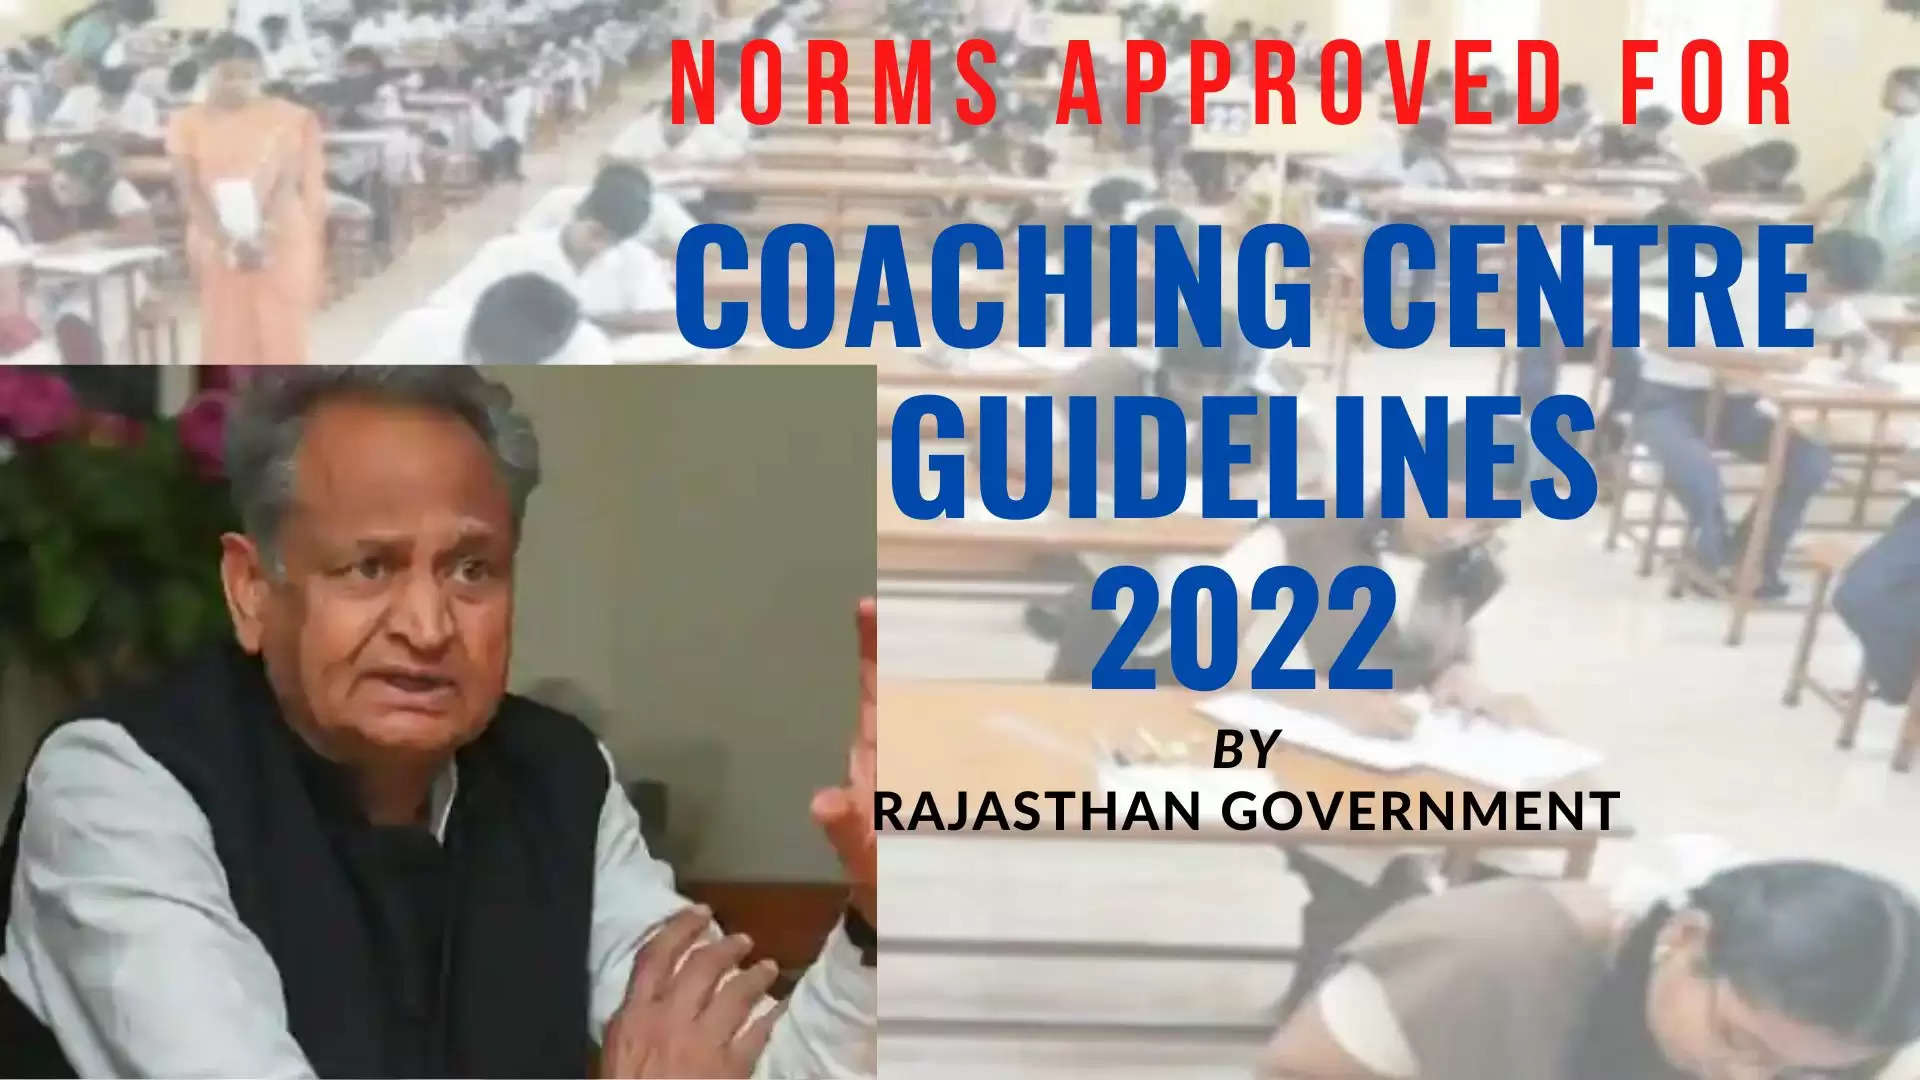 Coaching Centre Guidelines 2022, Rajasthan Government takes steps to tighten regulations for Coaching Centres in the state, Udaipur Coaching Centres,How to choose your  coaching centre